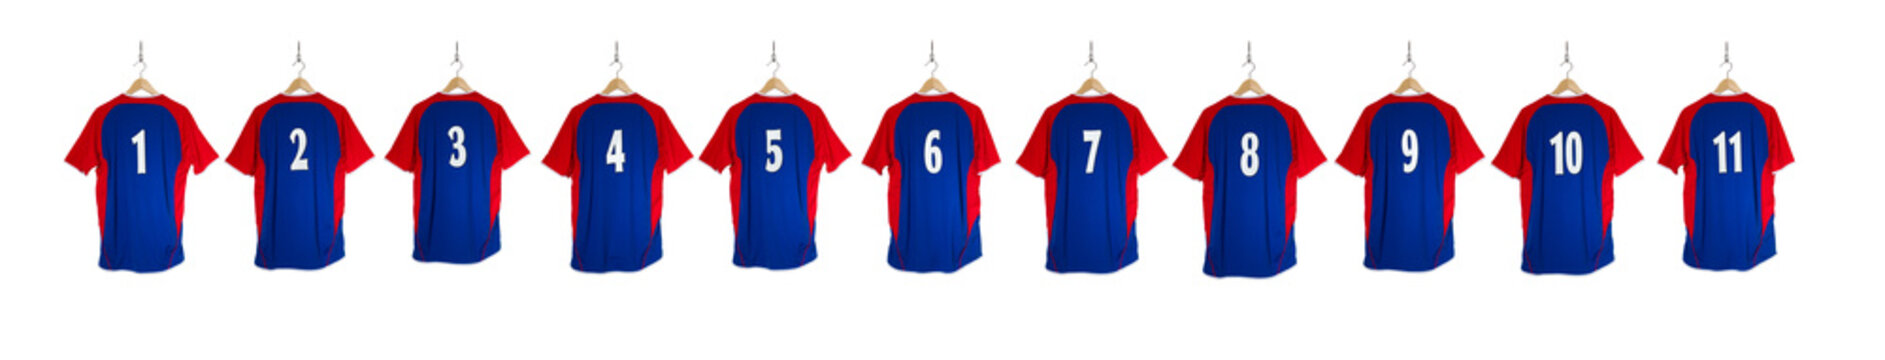 Row of Blue Football Shirts  isolated on white background